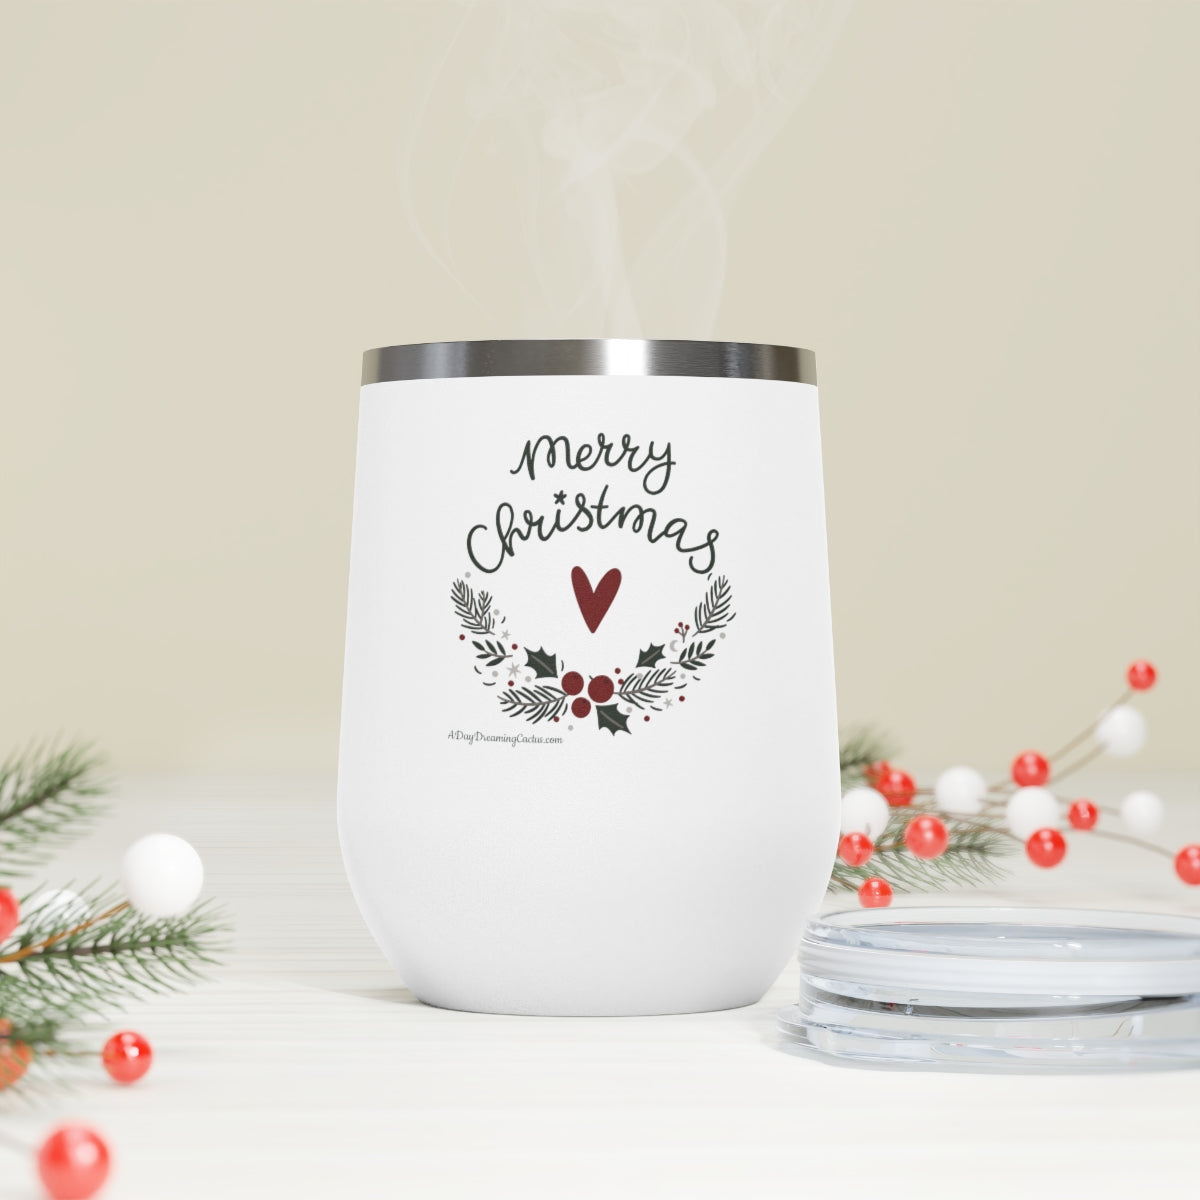 Merry Christmas Heart and Greenery White or Silver 12oz Insulated Wine Tumbler - Cup Mug Drinkware